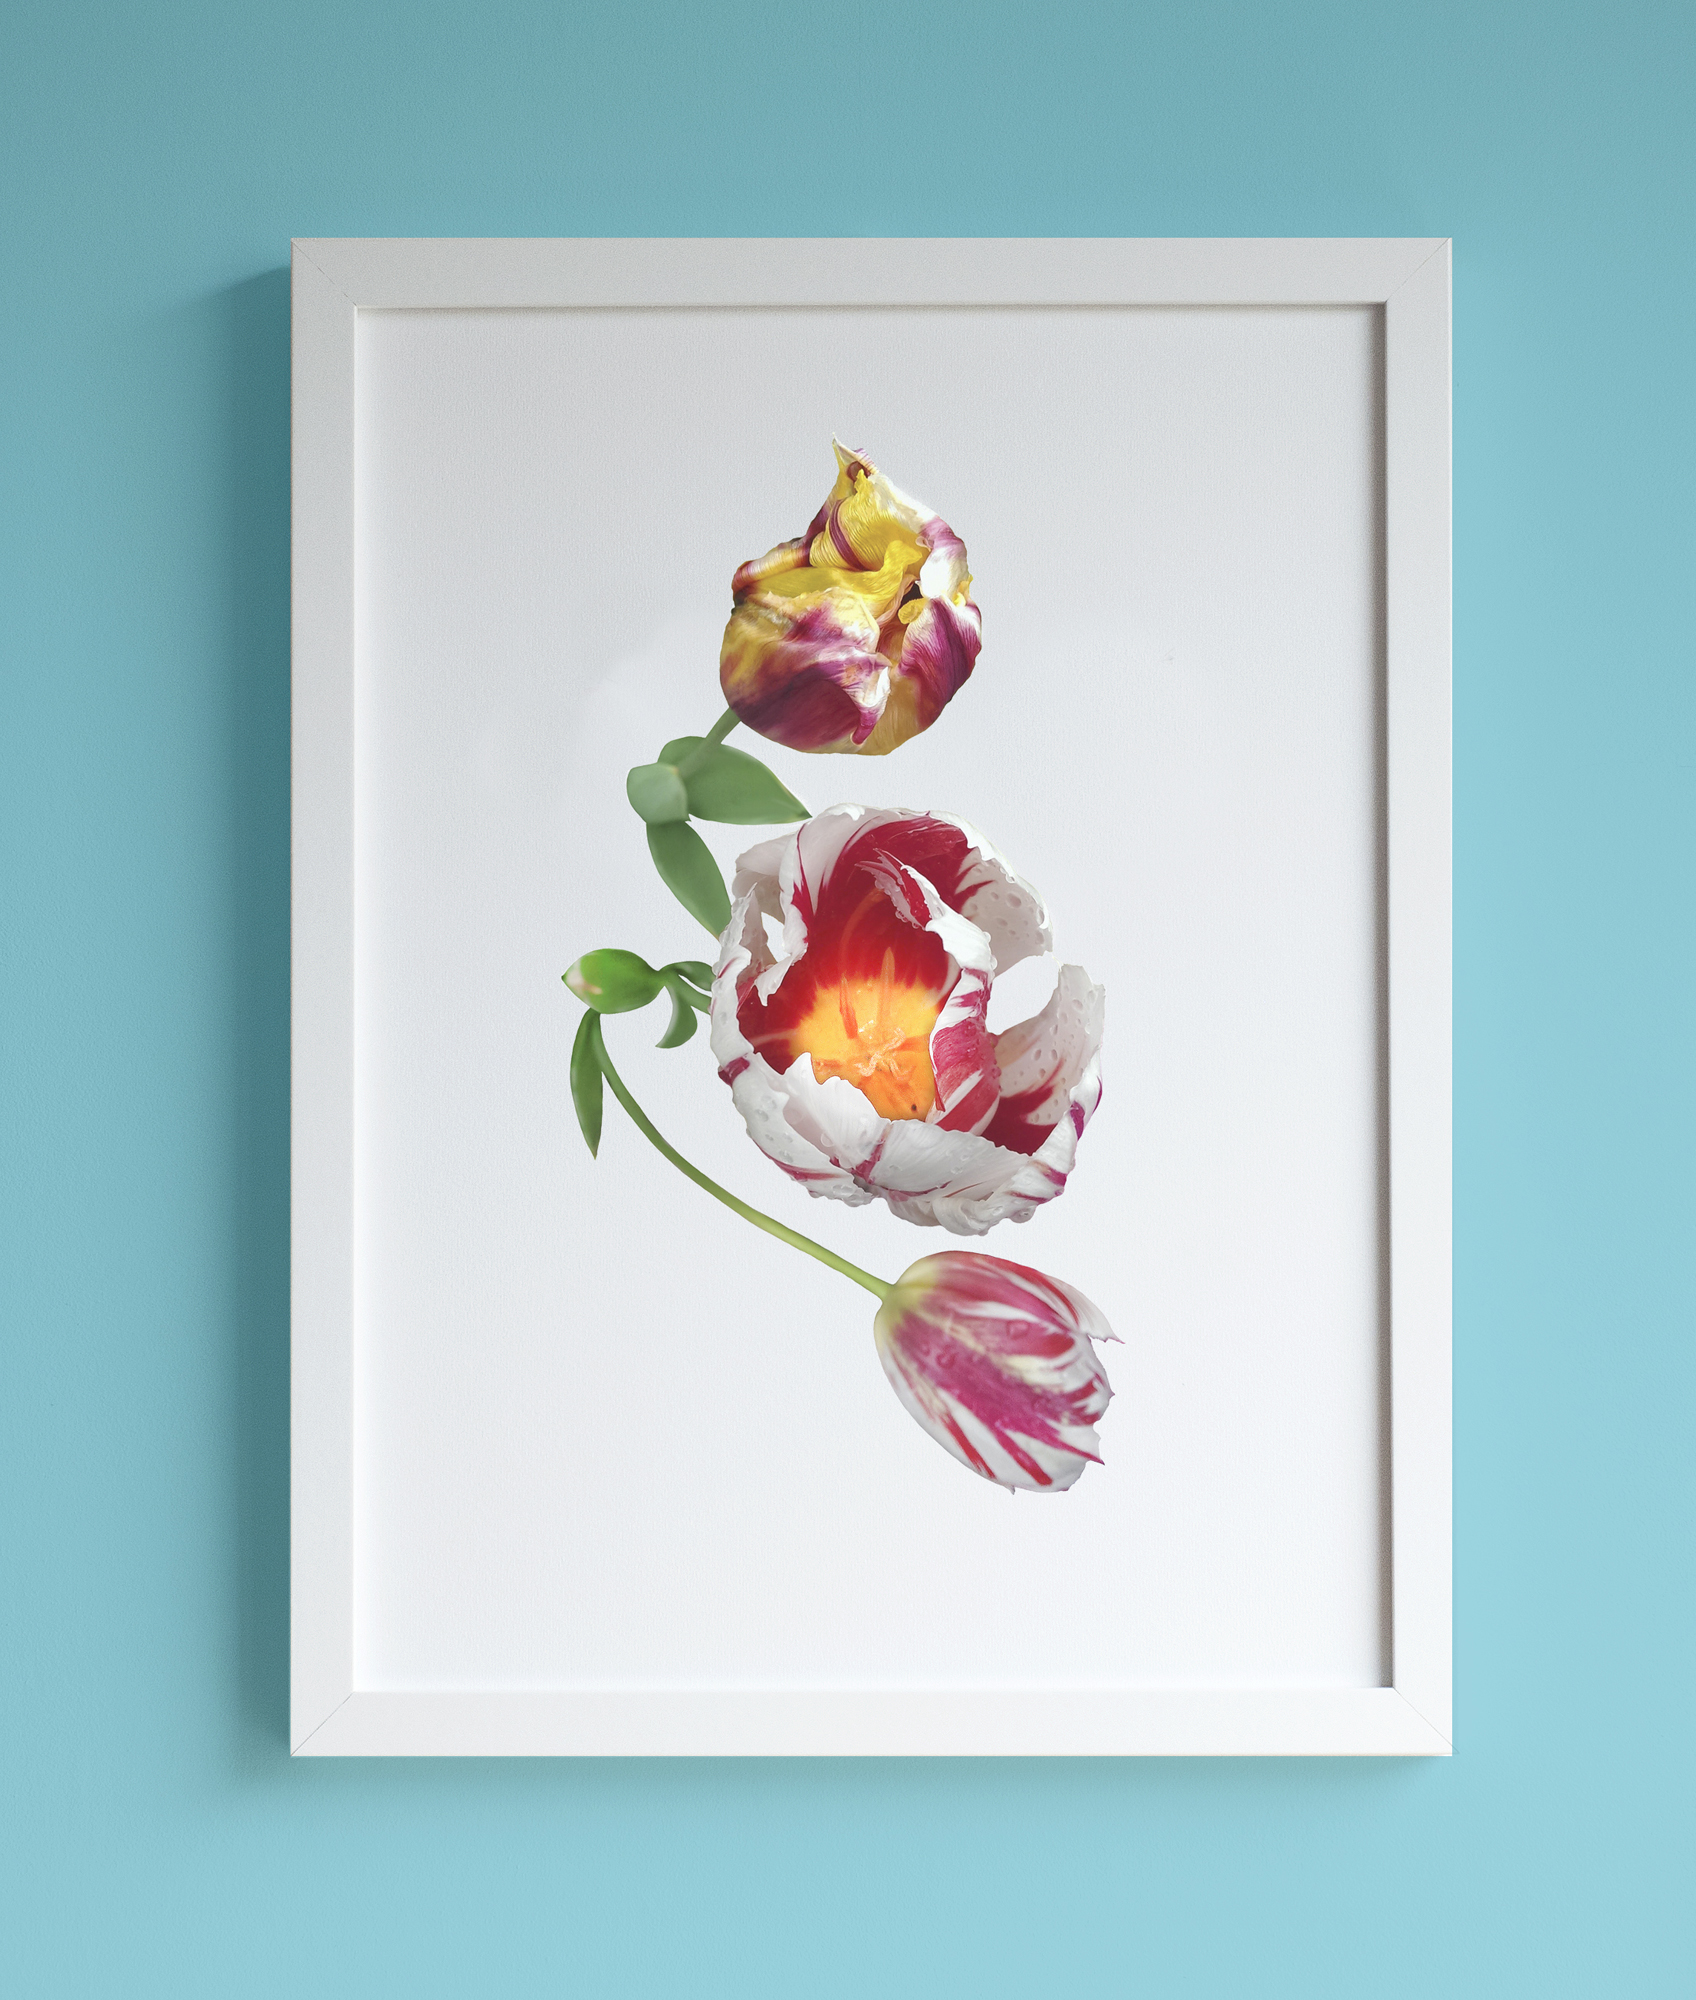 Image of framed print featuring three red, white and yellow tulips